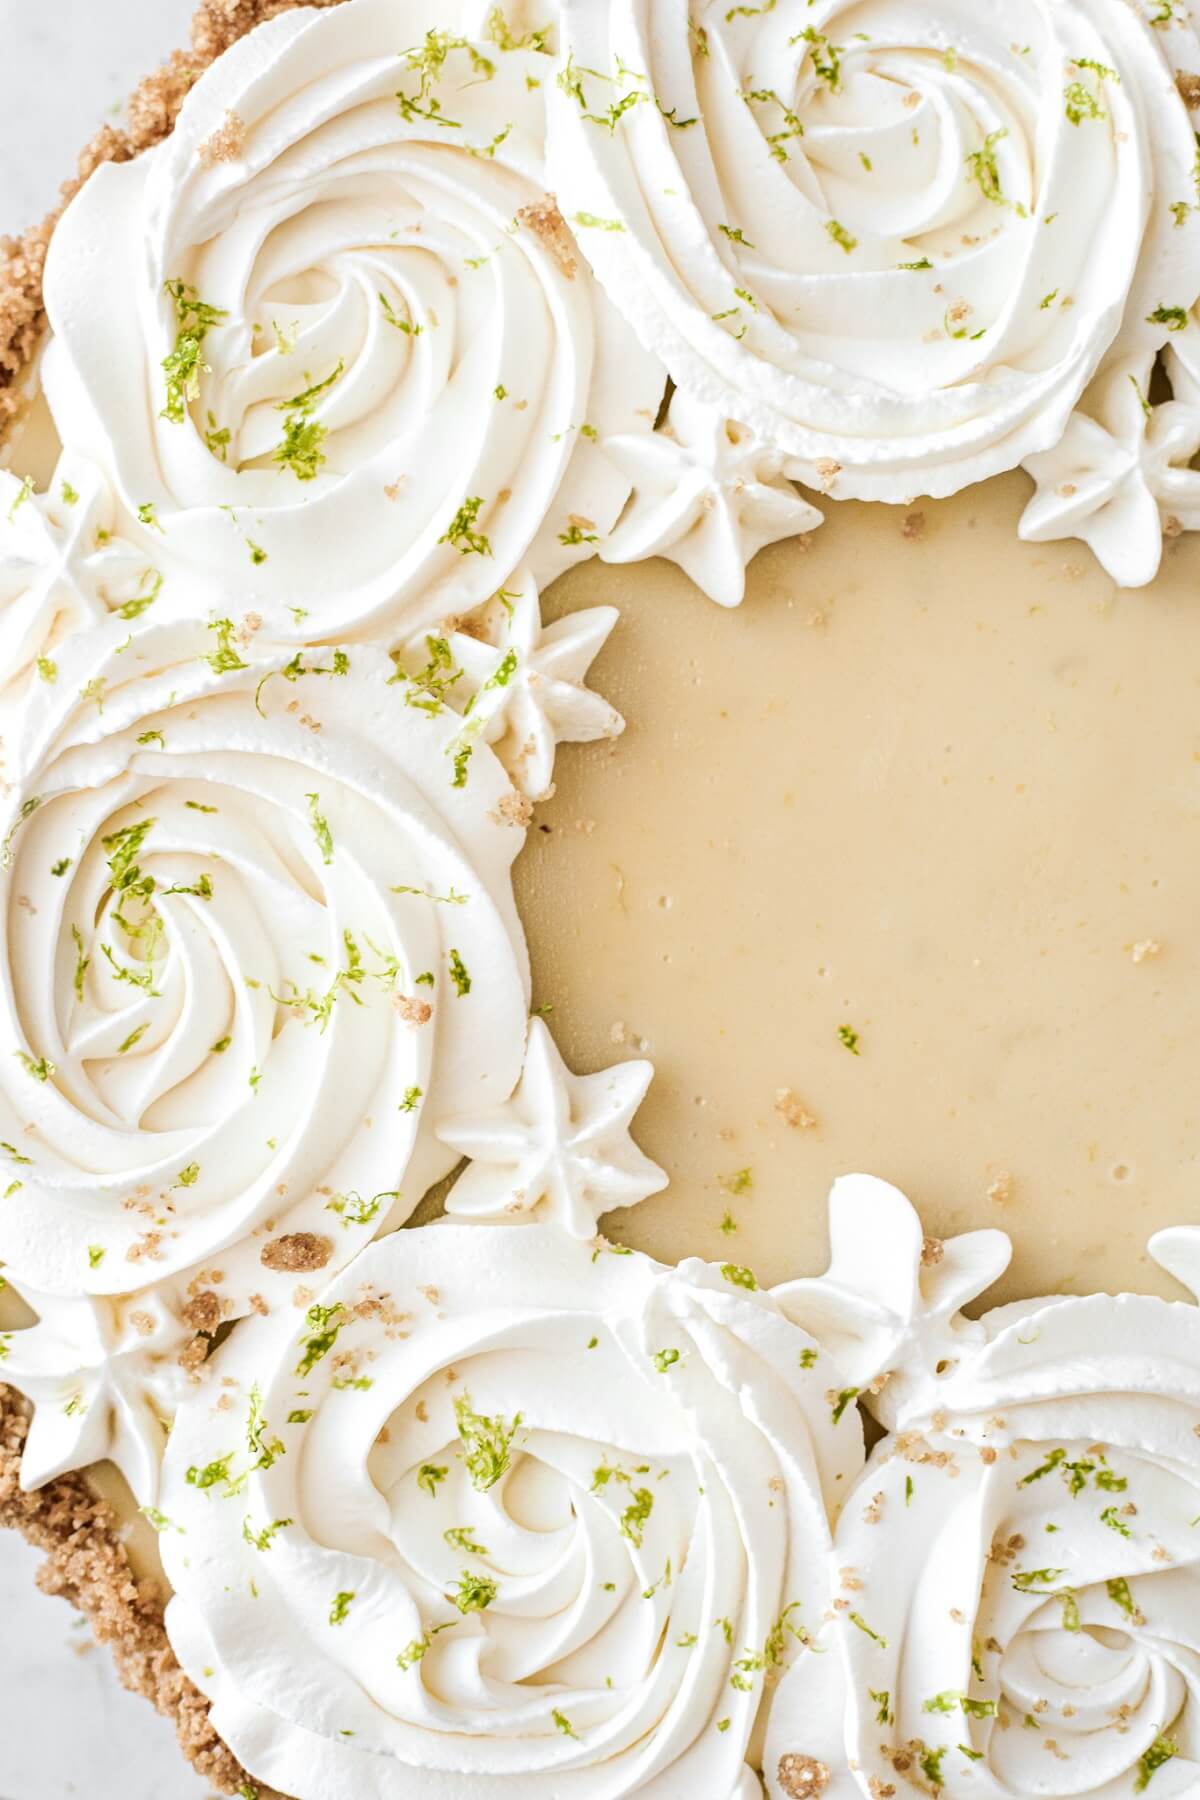 Key lime pie with whipped cream rosettes and lime zest.